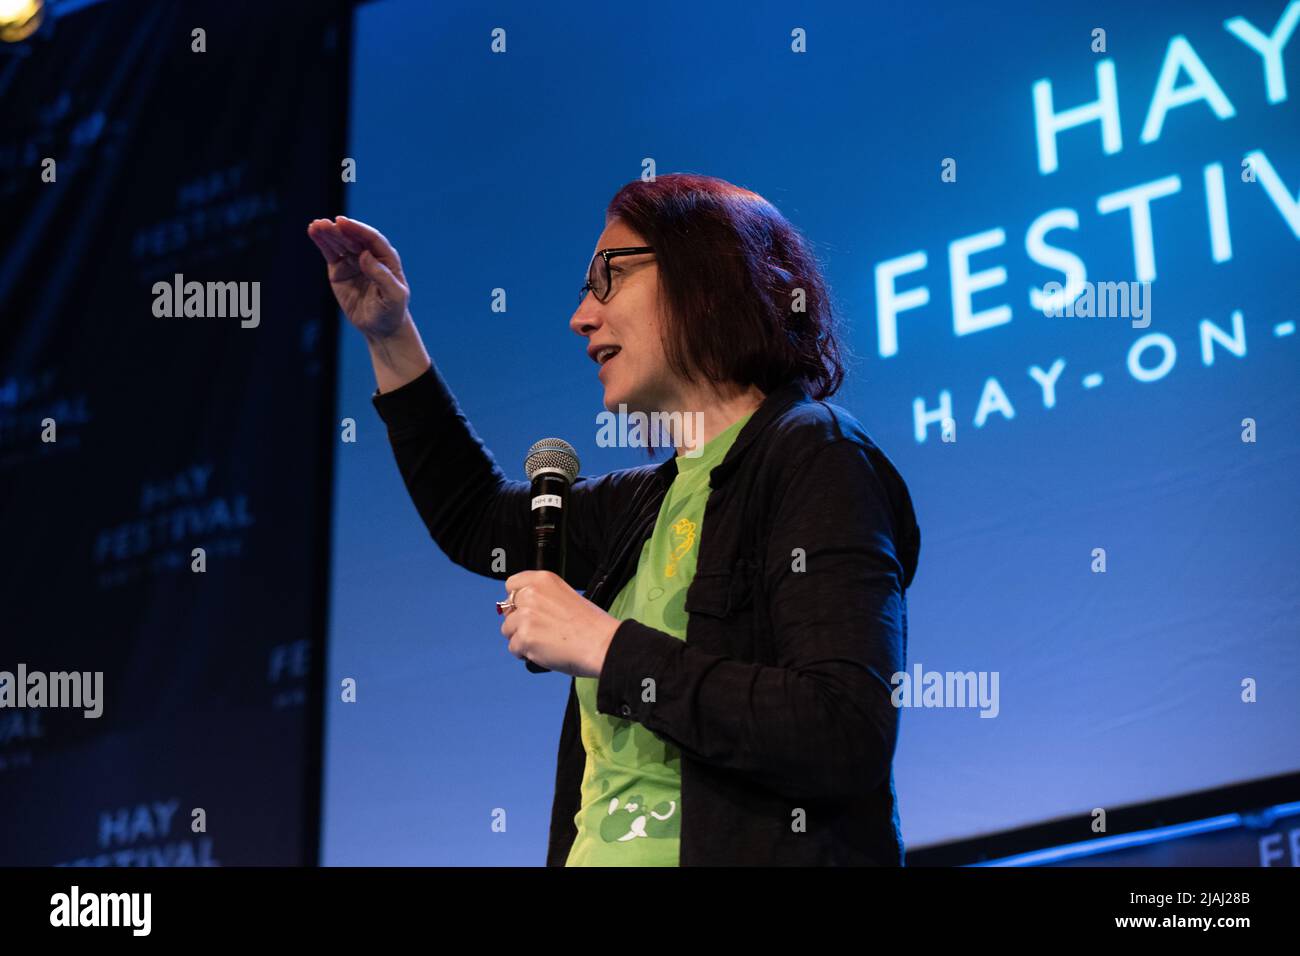 Hay-on-Wye, Wales, UK. 30th May, 2022. Natalie Haynes performing stand-up comedy at Hay Festival 2022, Wales. Credit: Sam Hardwick/Alamy. Stock Photo